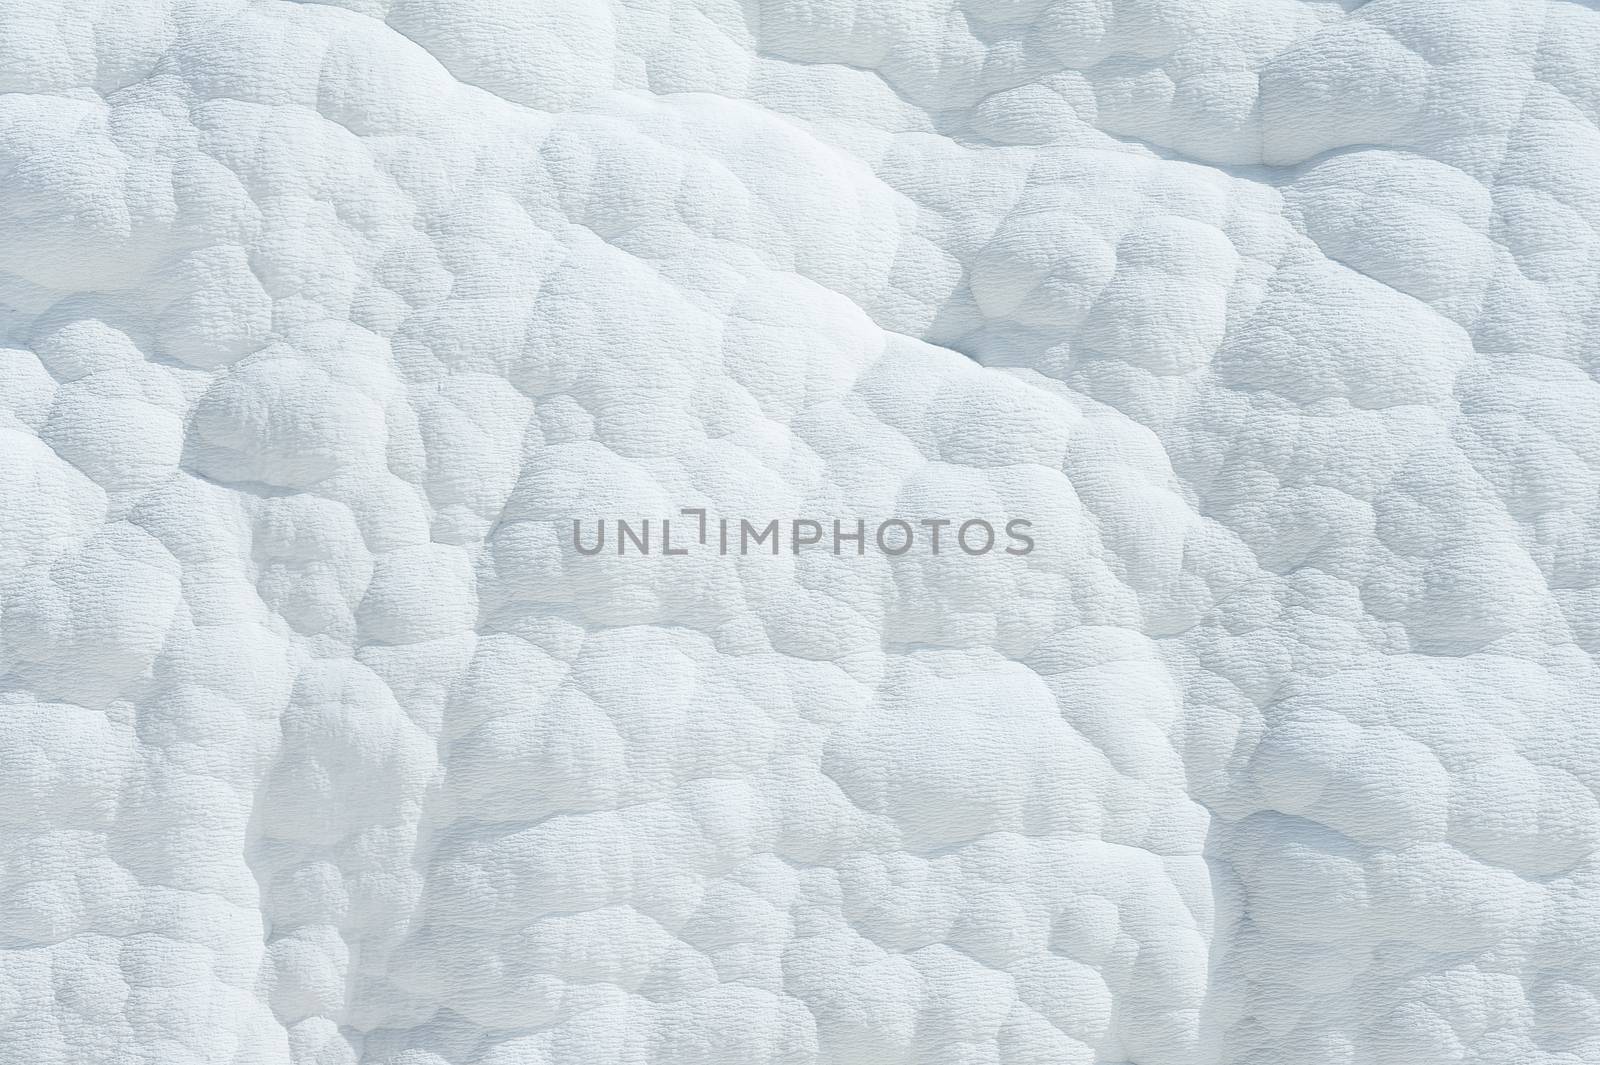 Pamukkale (cotton castle) natural wonder is created by a layers of white travertine looking like cotton, Turkey 